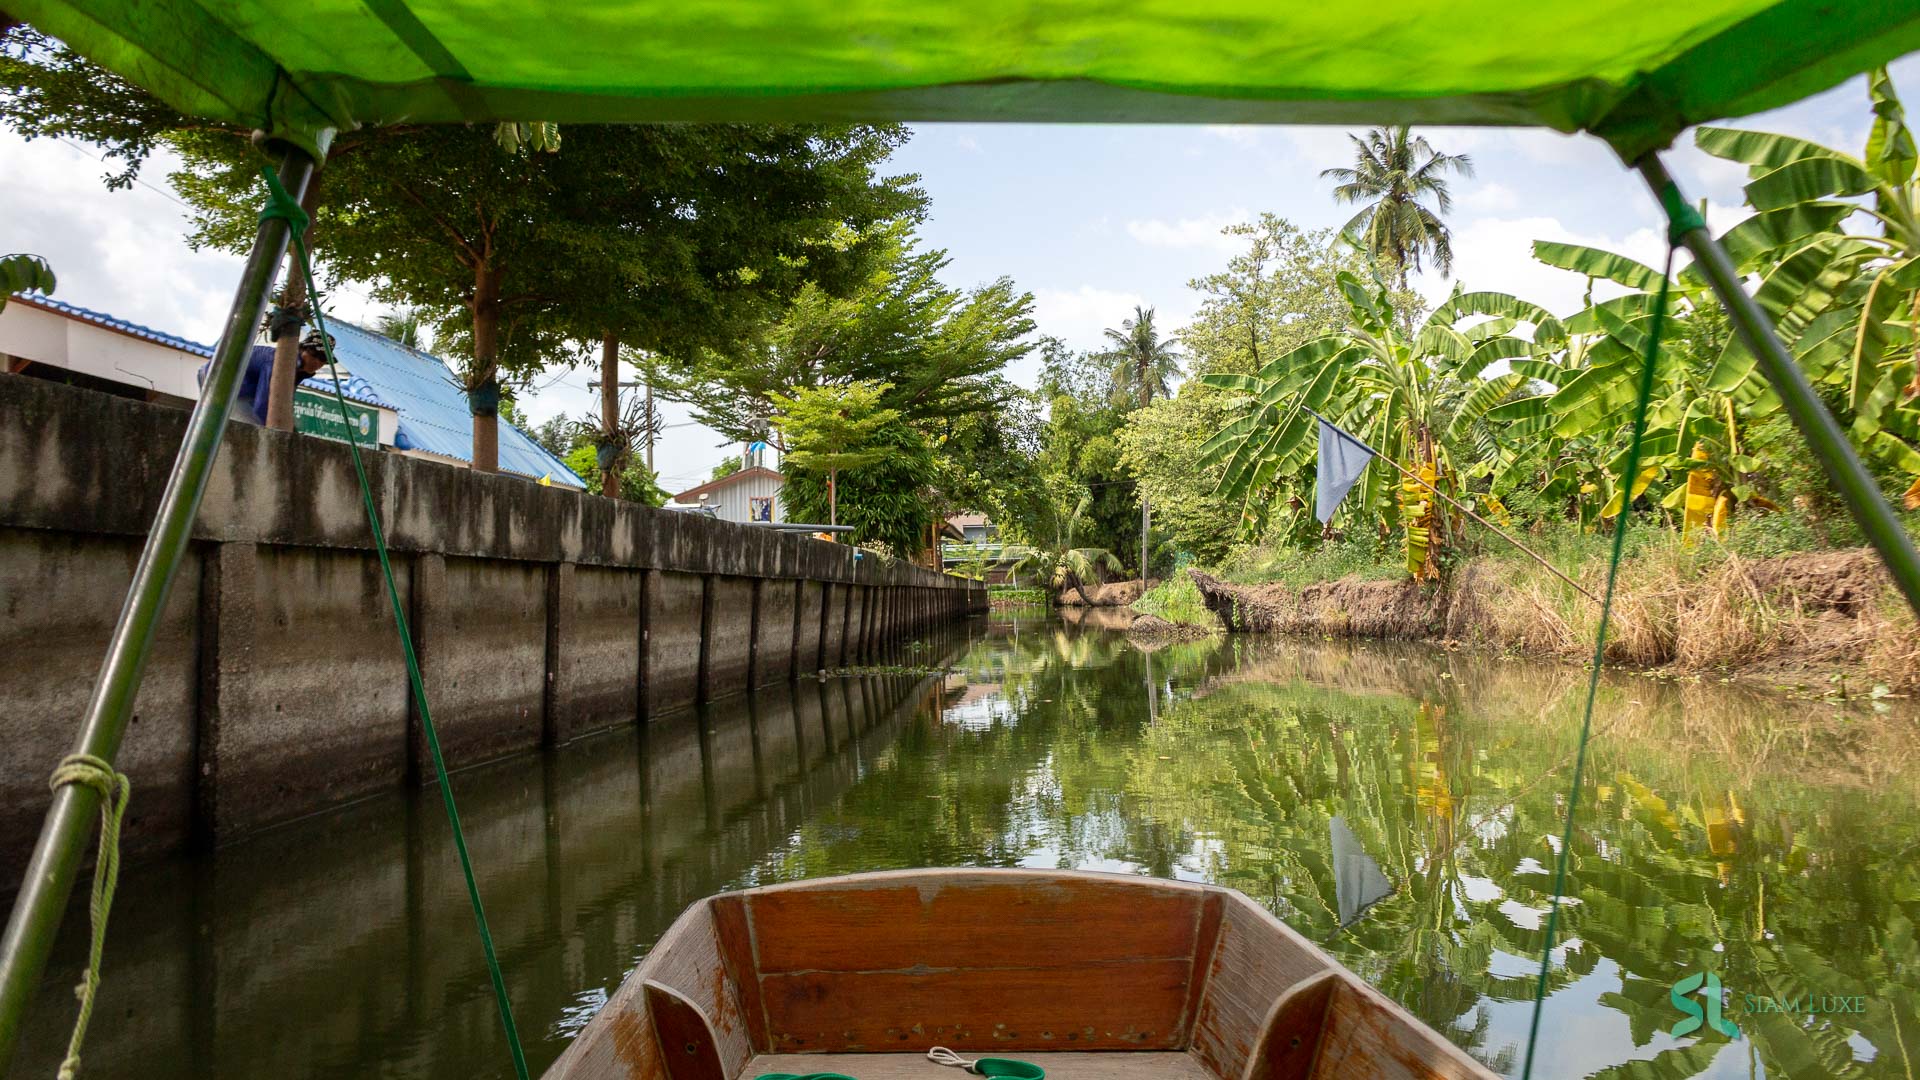 A long-tail speedboat through the Mahasawat Canal Tour in Thailand